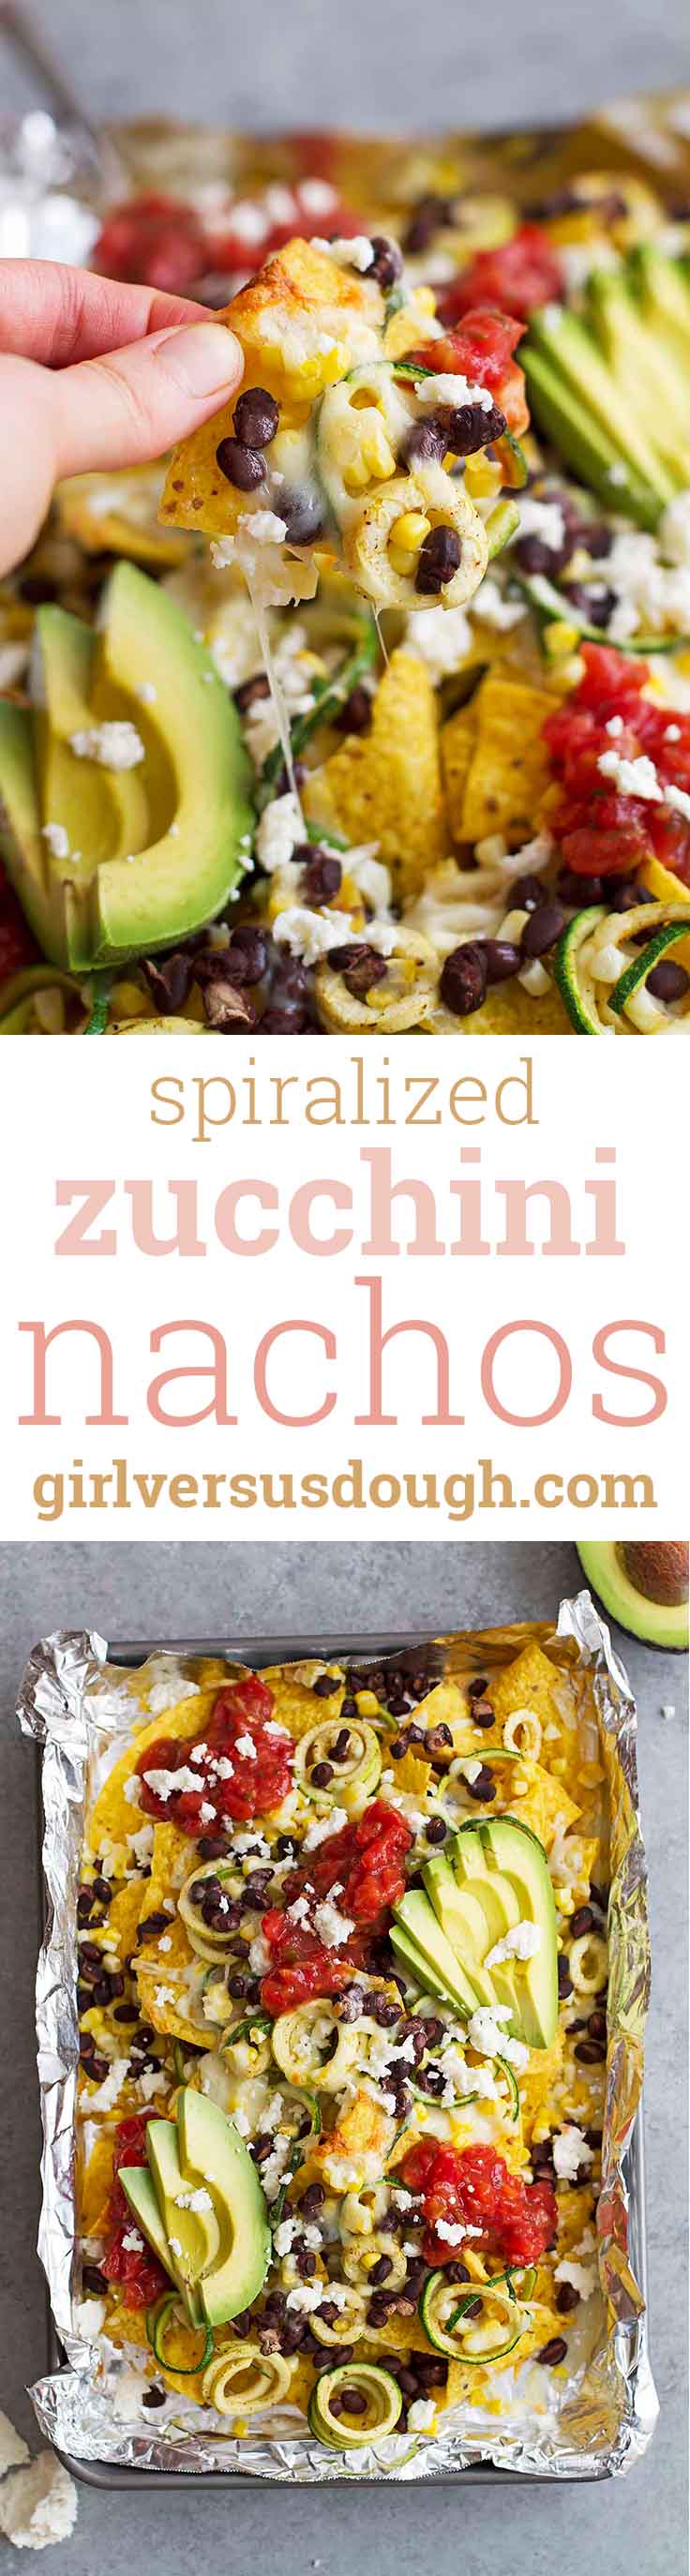 Spiralized Zucchini Nachos -- swirls of zucchini spirals with crunchy tortilla chips, melty cheese, fresh corn and black beans make these the ultimate nachos. girlversusdough.com @girlversusdough